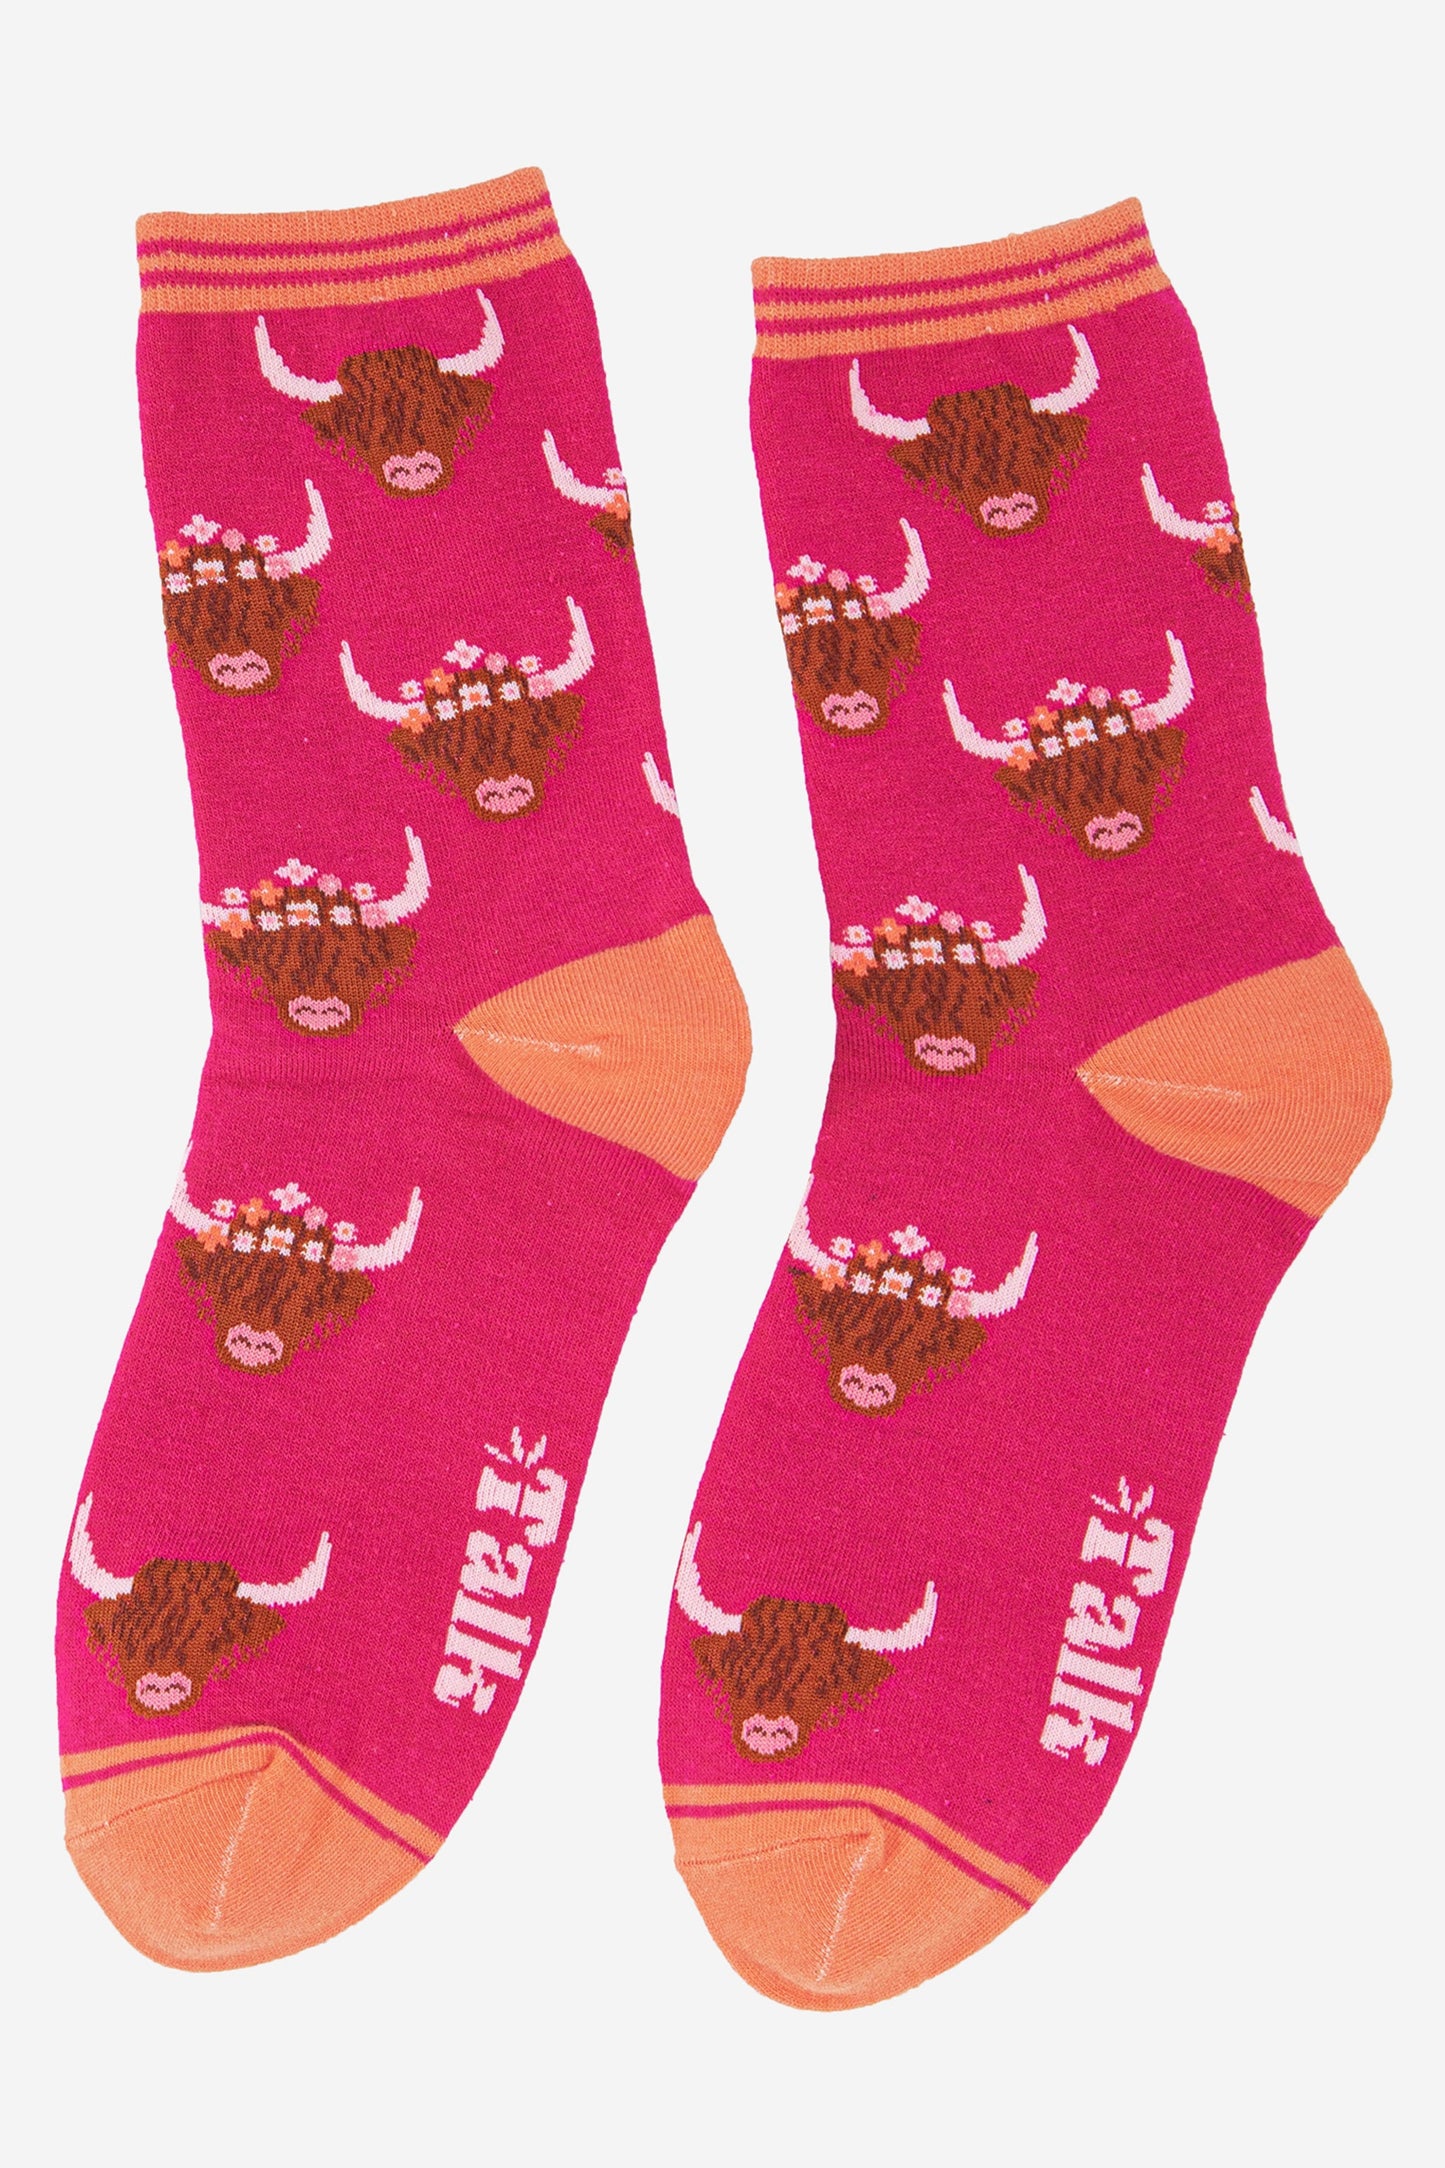 fuchsia pink bamboo socks with a pale orange heel, toe and cuff featuring a highland cattle pattern